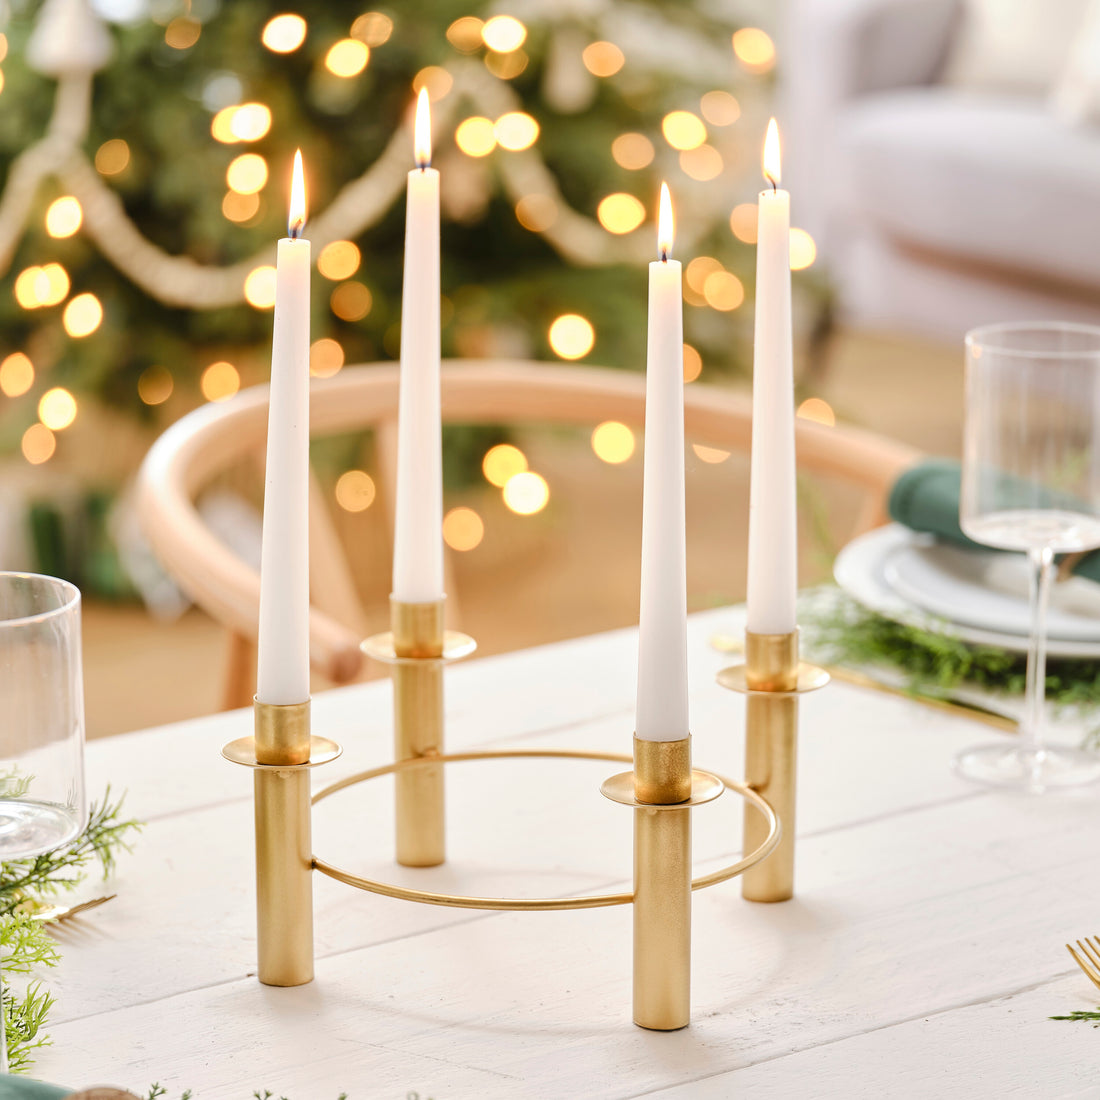 How to create a winter wonderland Christmas tablescape